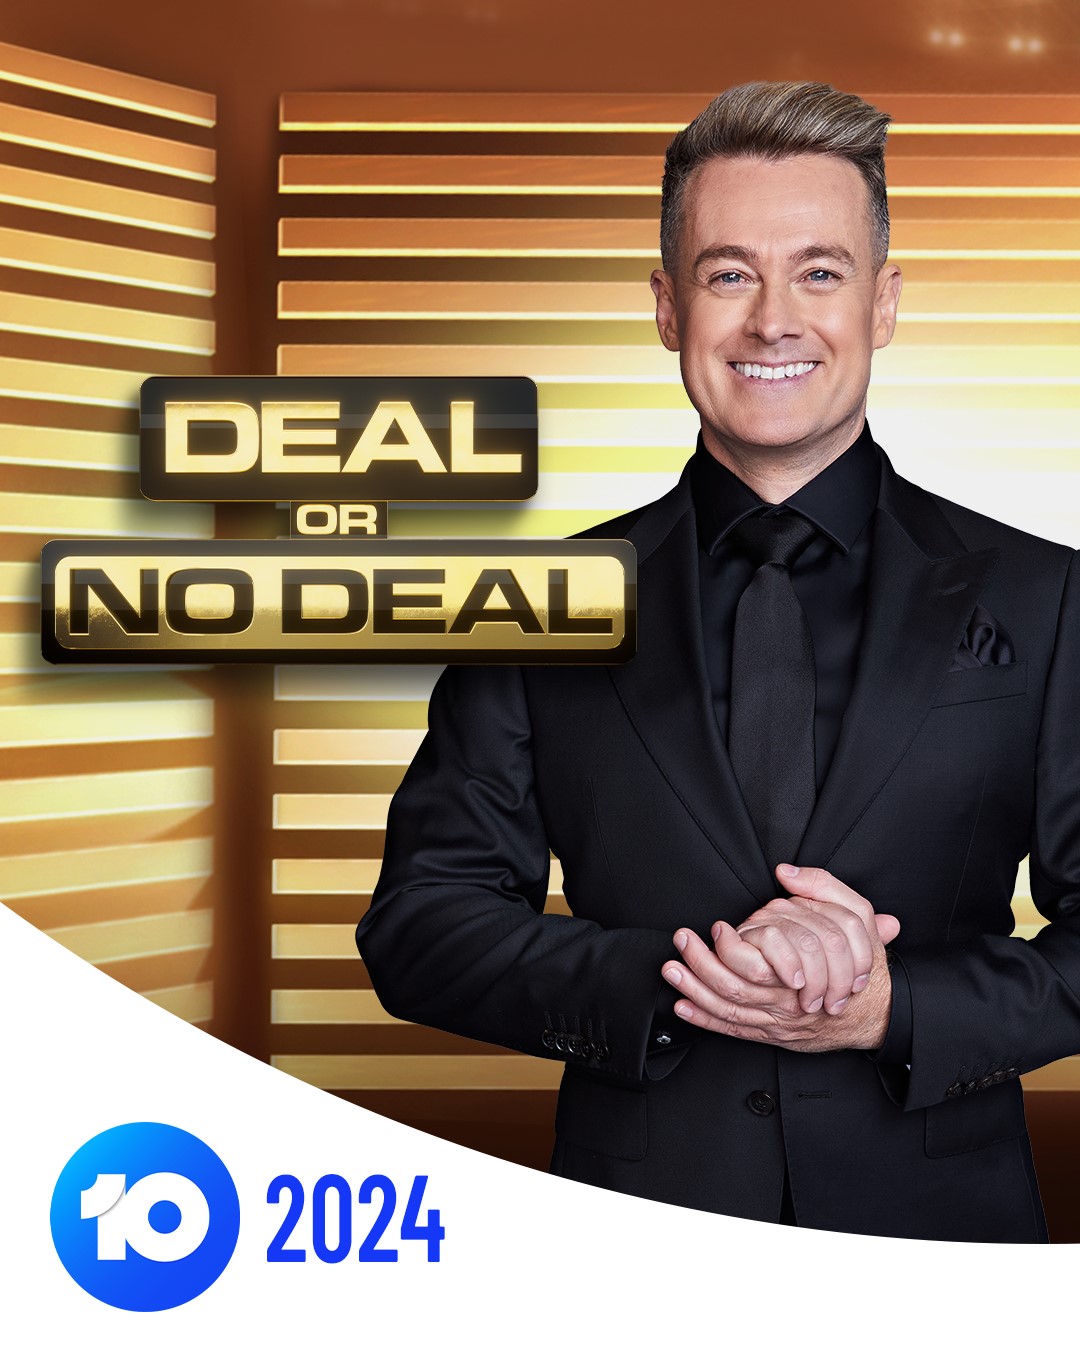 10 Upfronts 2024 | Deal or No Deal on 10 with Grant Denyer - TV Central